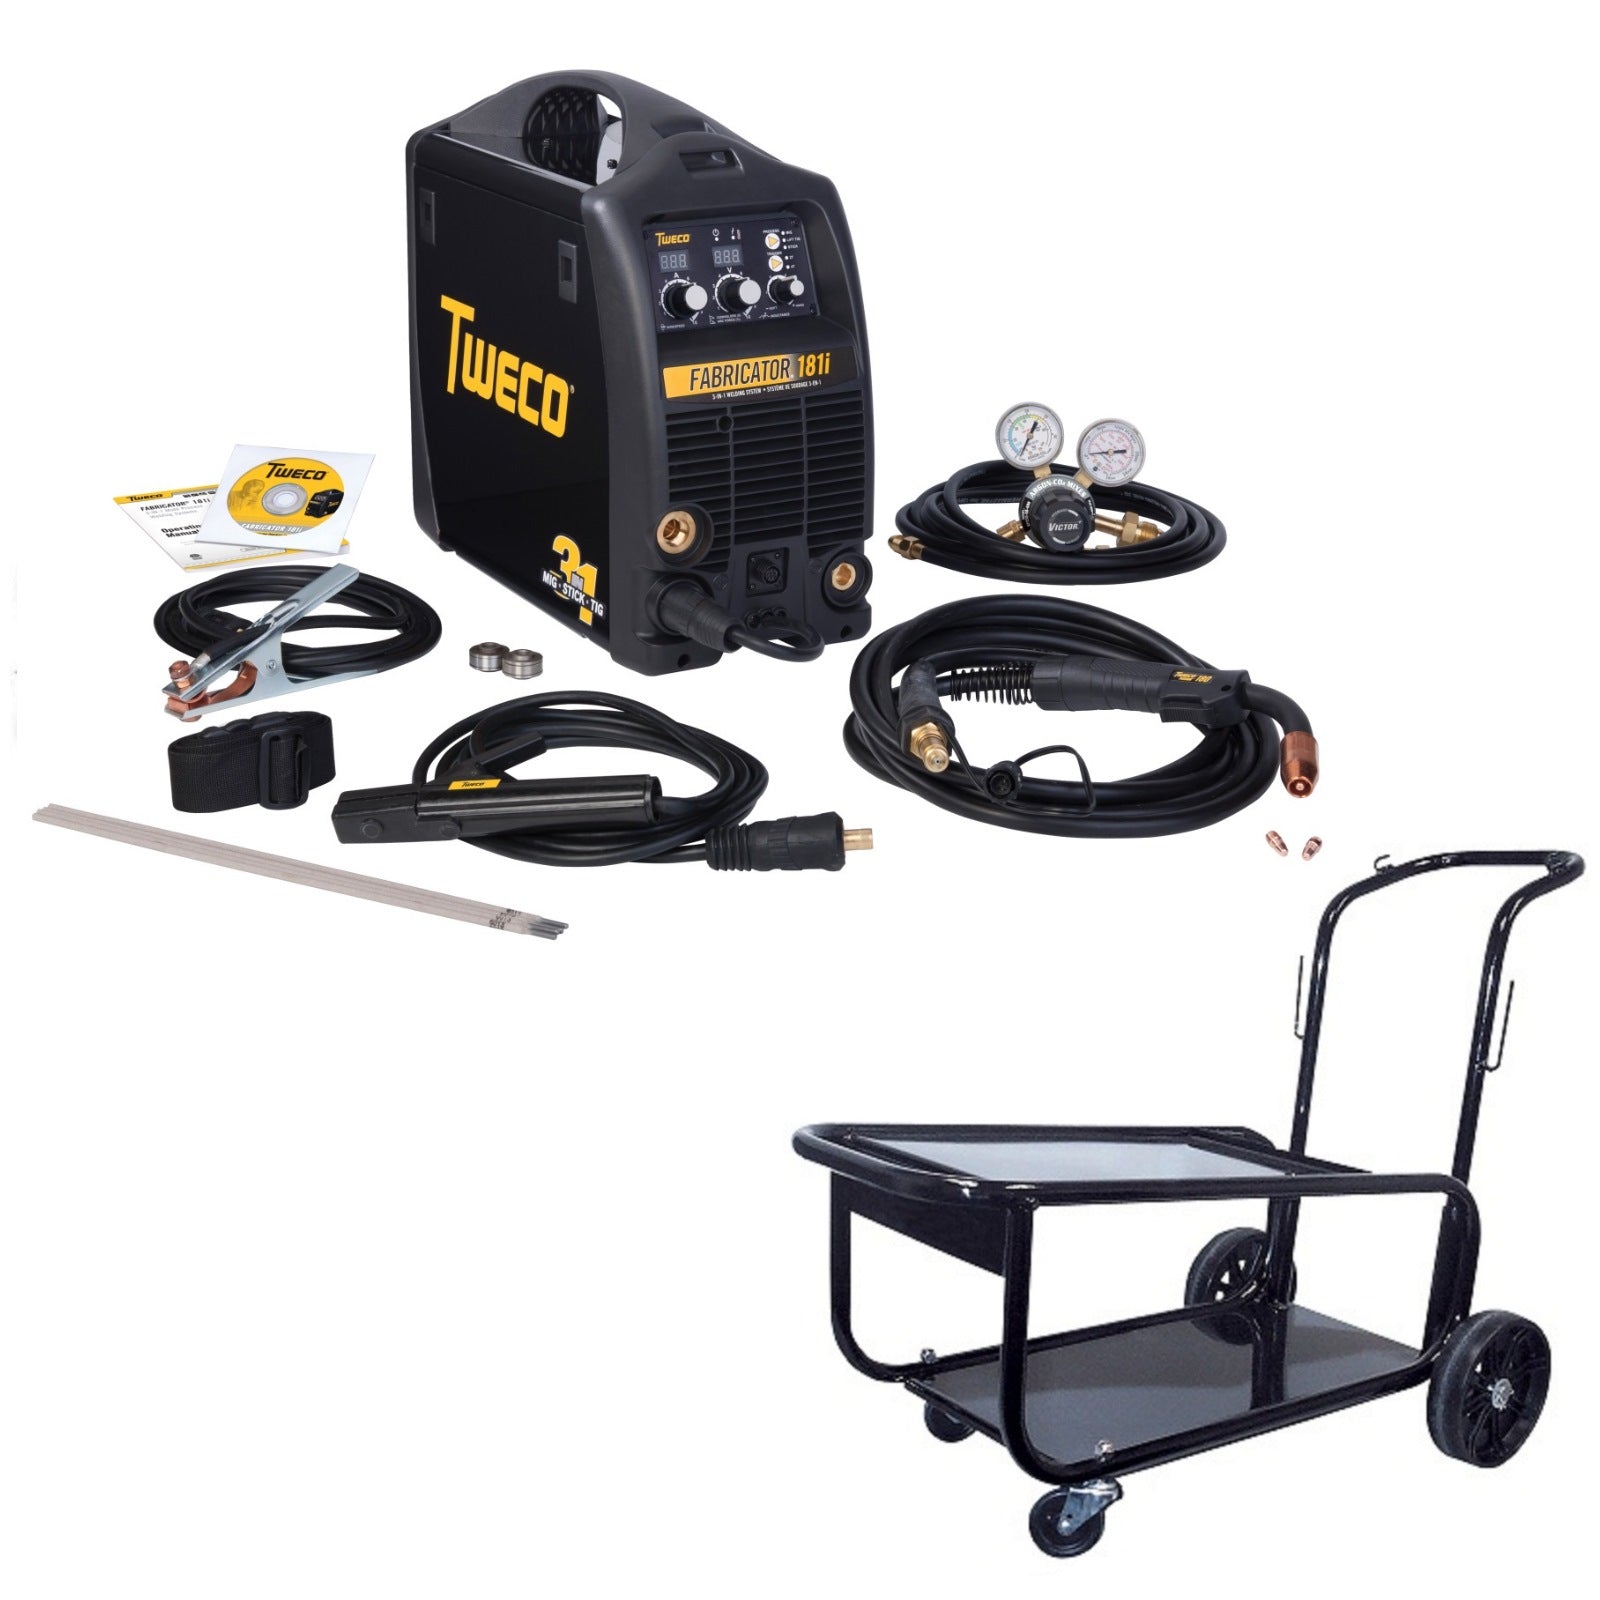 Tweco Fabricator 181I MIG and Stick & TIG Welder Pkg with Cart (No Tig Torch Included) (W1003182)